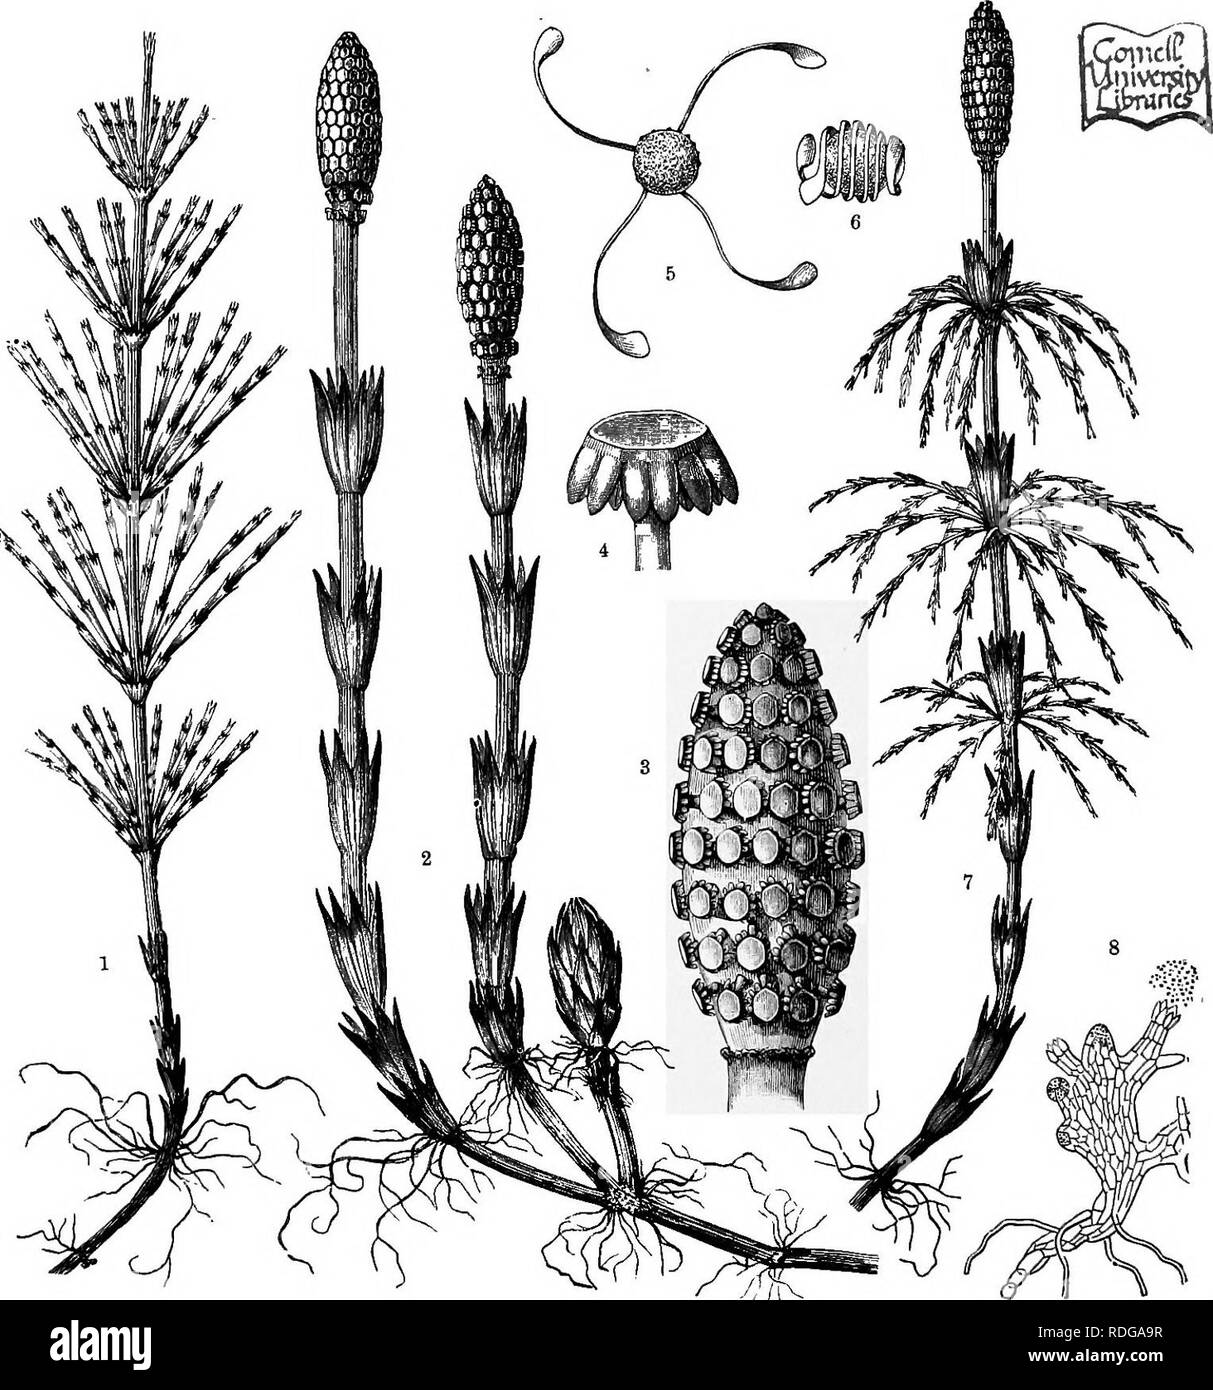 . The natural history of plants, their forms, growth, reproduction, and distribution;. Botany. Y12 THE SUBDIVISIONS OF THE VEGETABLE KINGDOM. to the large amount of silica contained in the epidermal membranes. The early spring shoots of many species are unbranched and terminate in spore-beanng cones (e.g. E. arvense, fig. 403 2), whilst later on other branching shoots arise which are sterile (fig. 4031). In other cases the fertile shoots are also branched (fig. 403 0-. Fig. 403.—Equisetaceas. 1 Summer sterile shoot o! Equisetuw, arvense. 2 Vernal, spore-bearing shoot ol Equisetwm arvense. s Fe Stock Photo